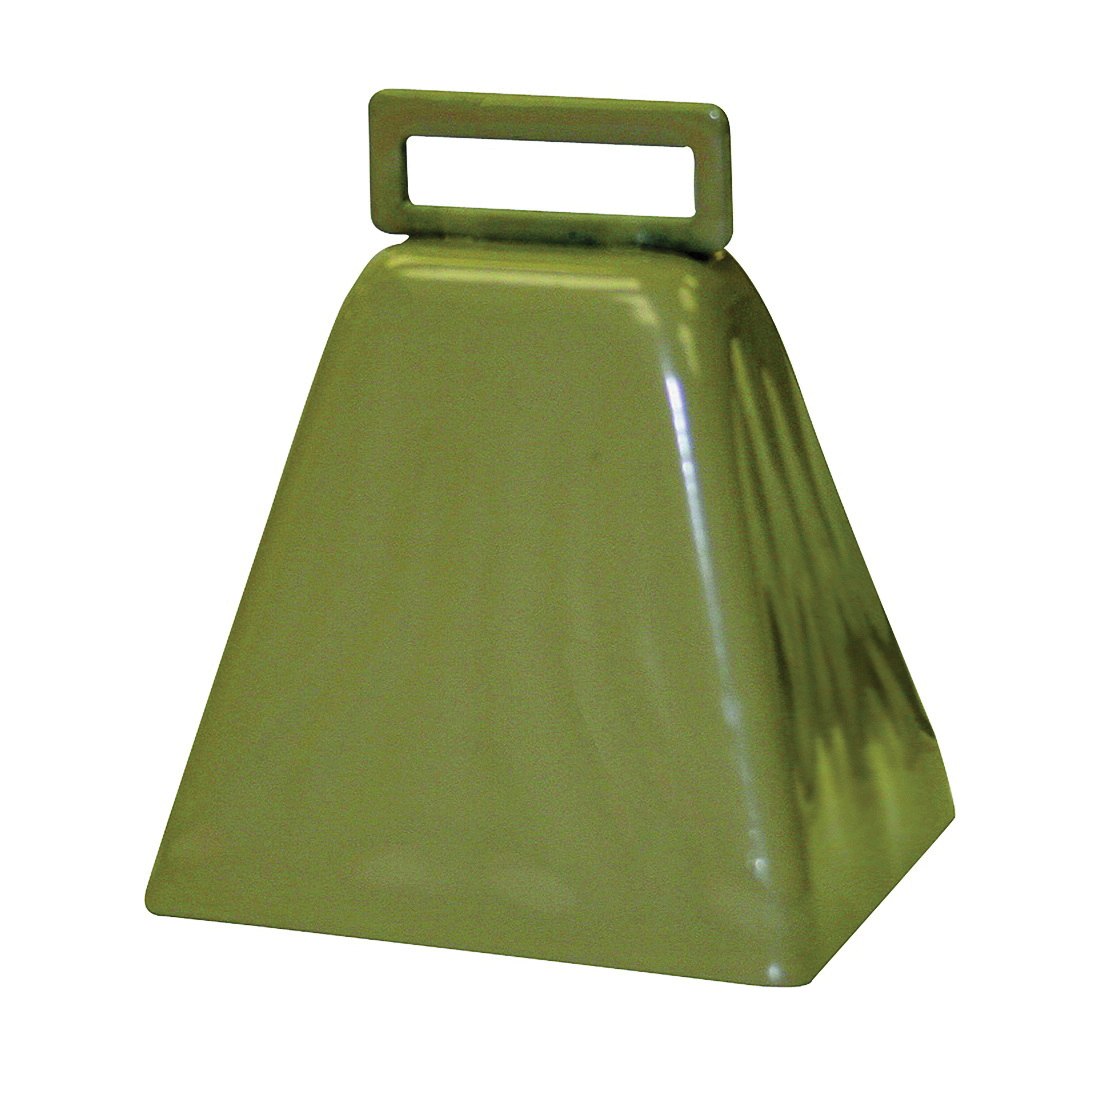 S90071000 Cow Bell, 10LD Bell, Steel, Powder-Coated